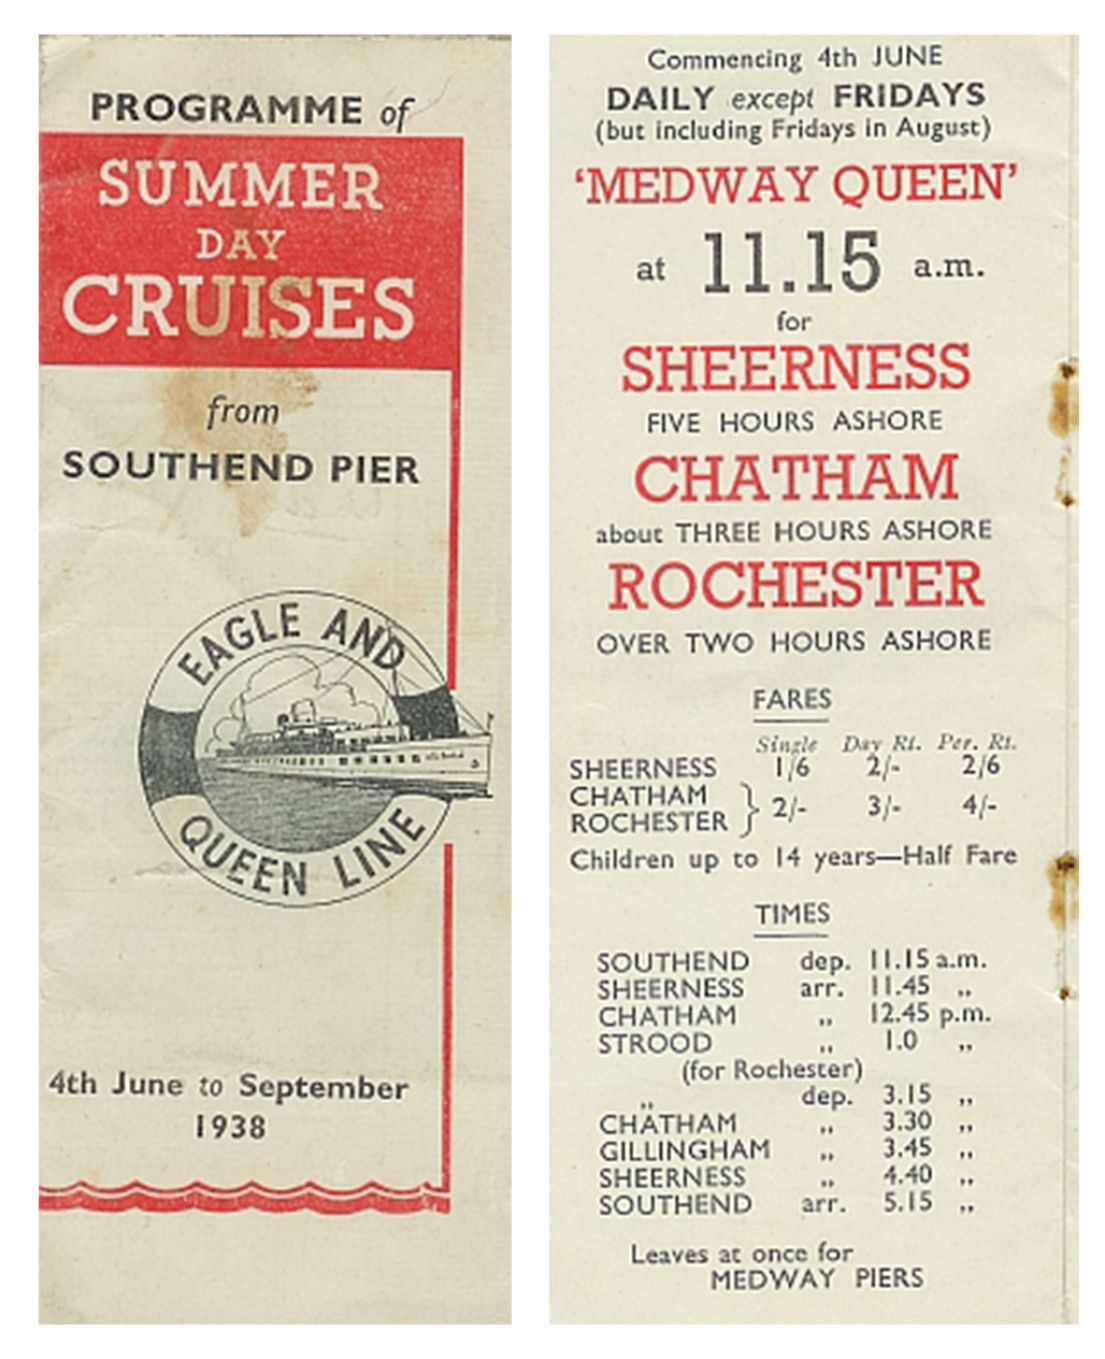 A program of summer day cruises from Southend Pier for the Medway Queen.